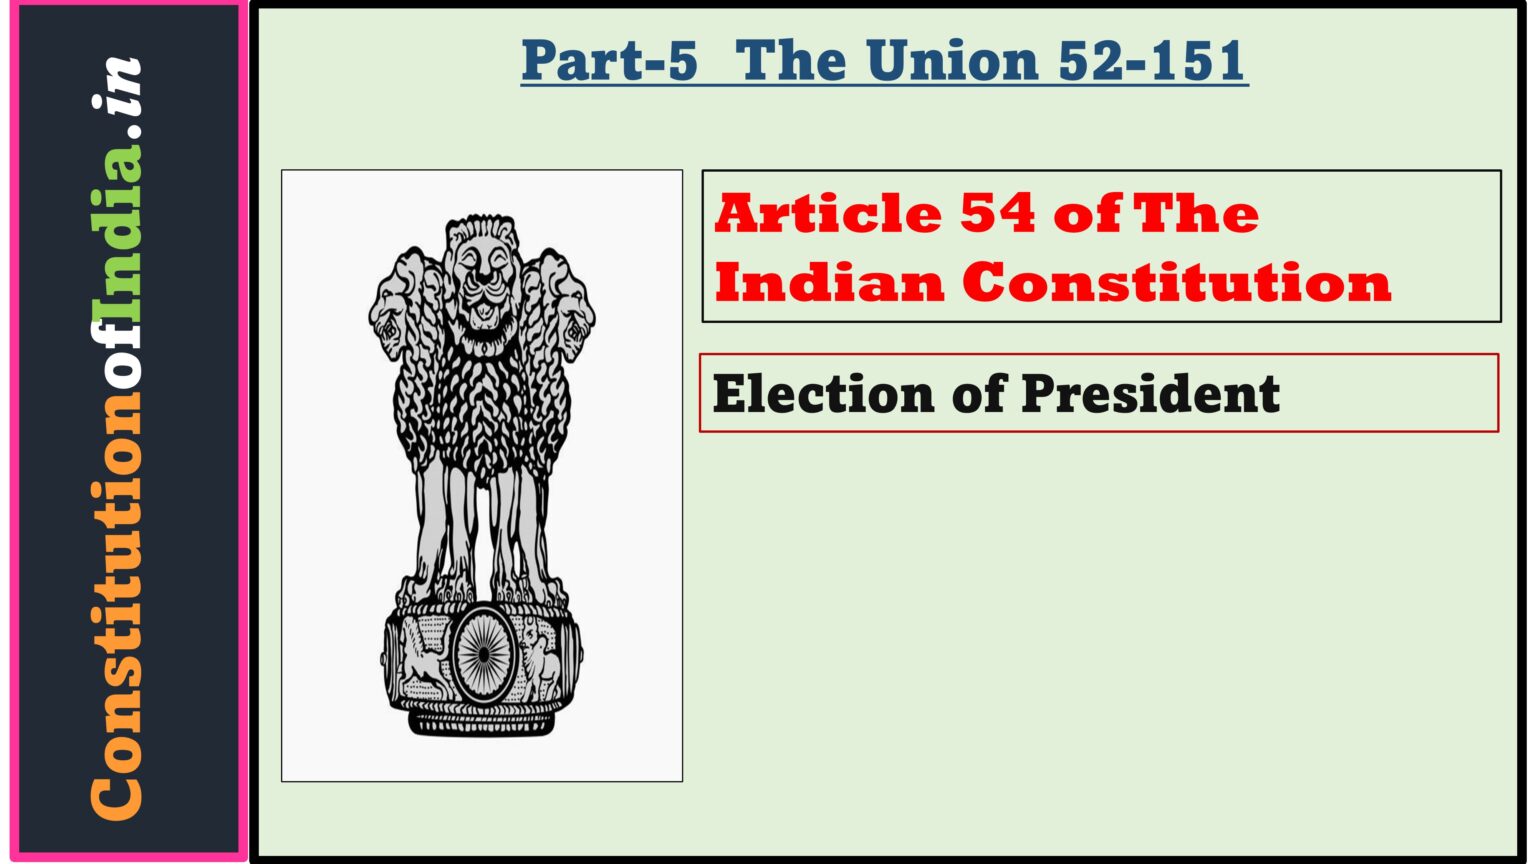 a article 54